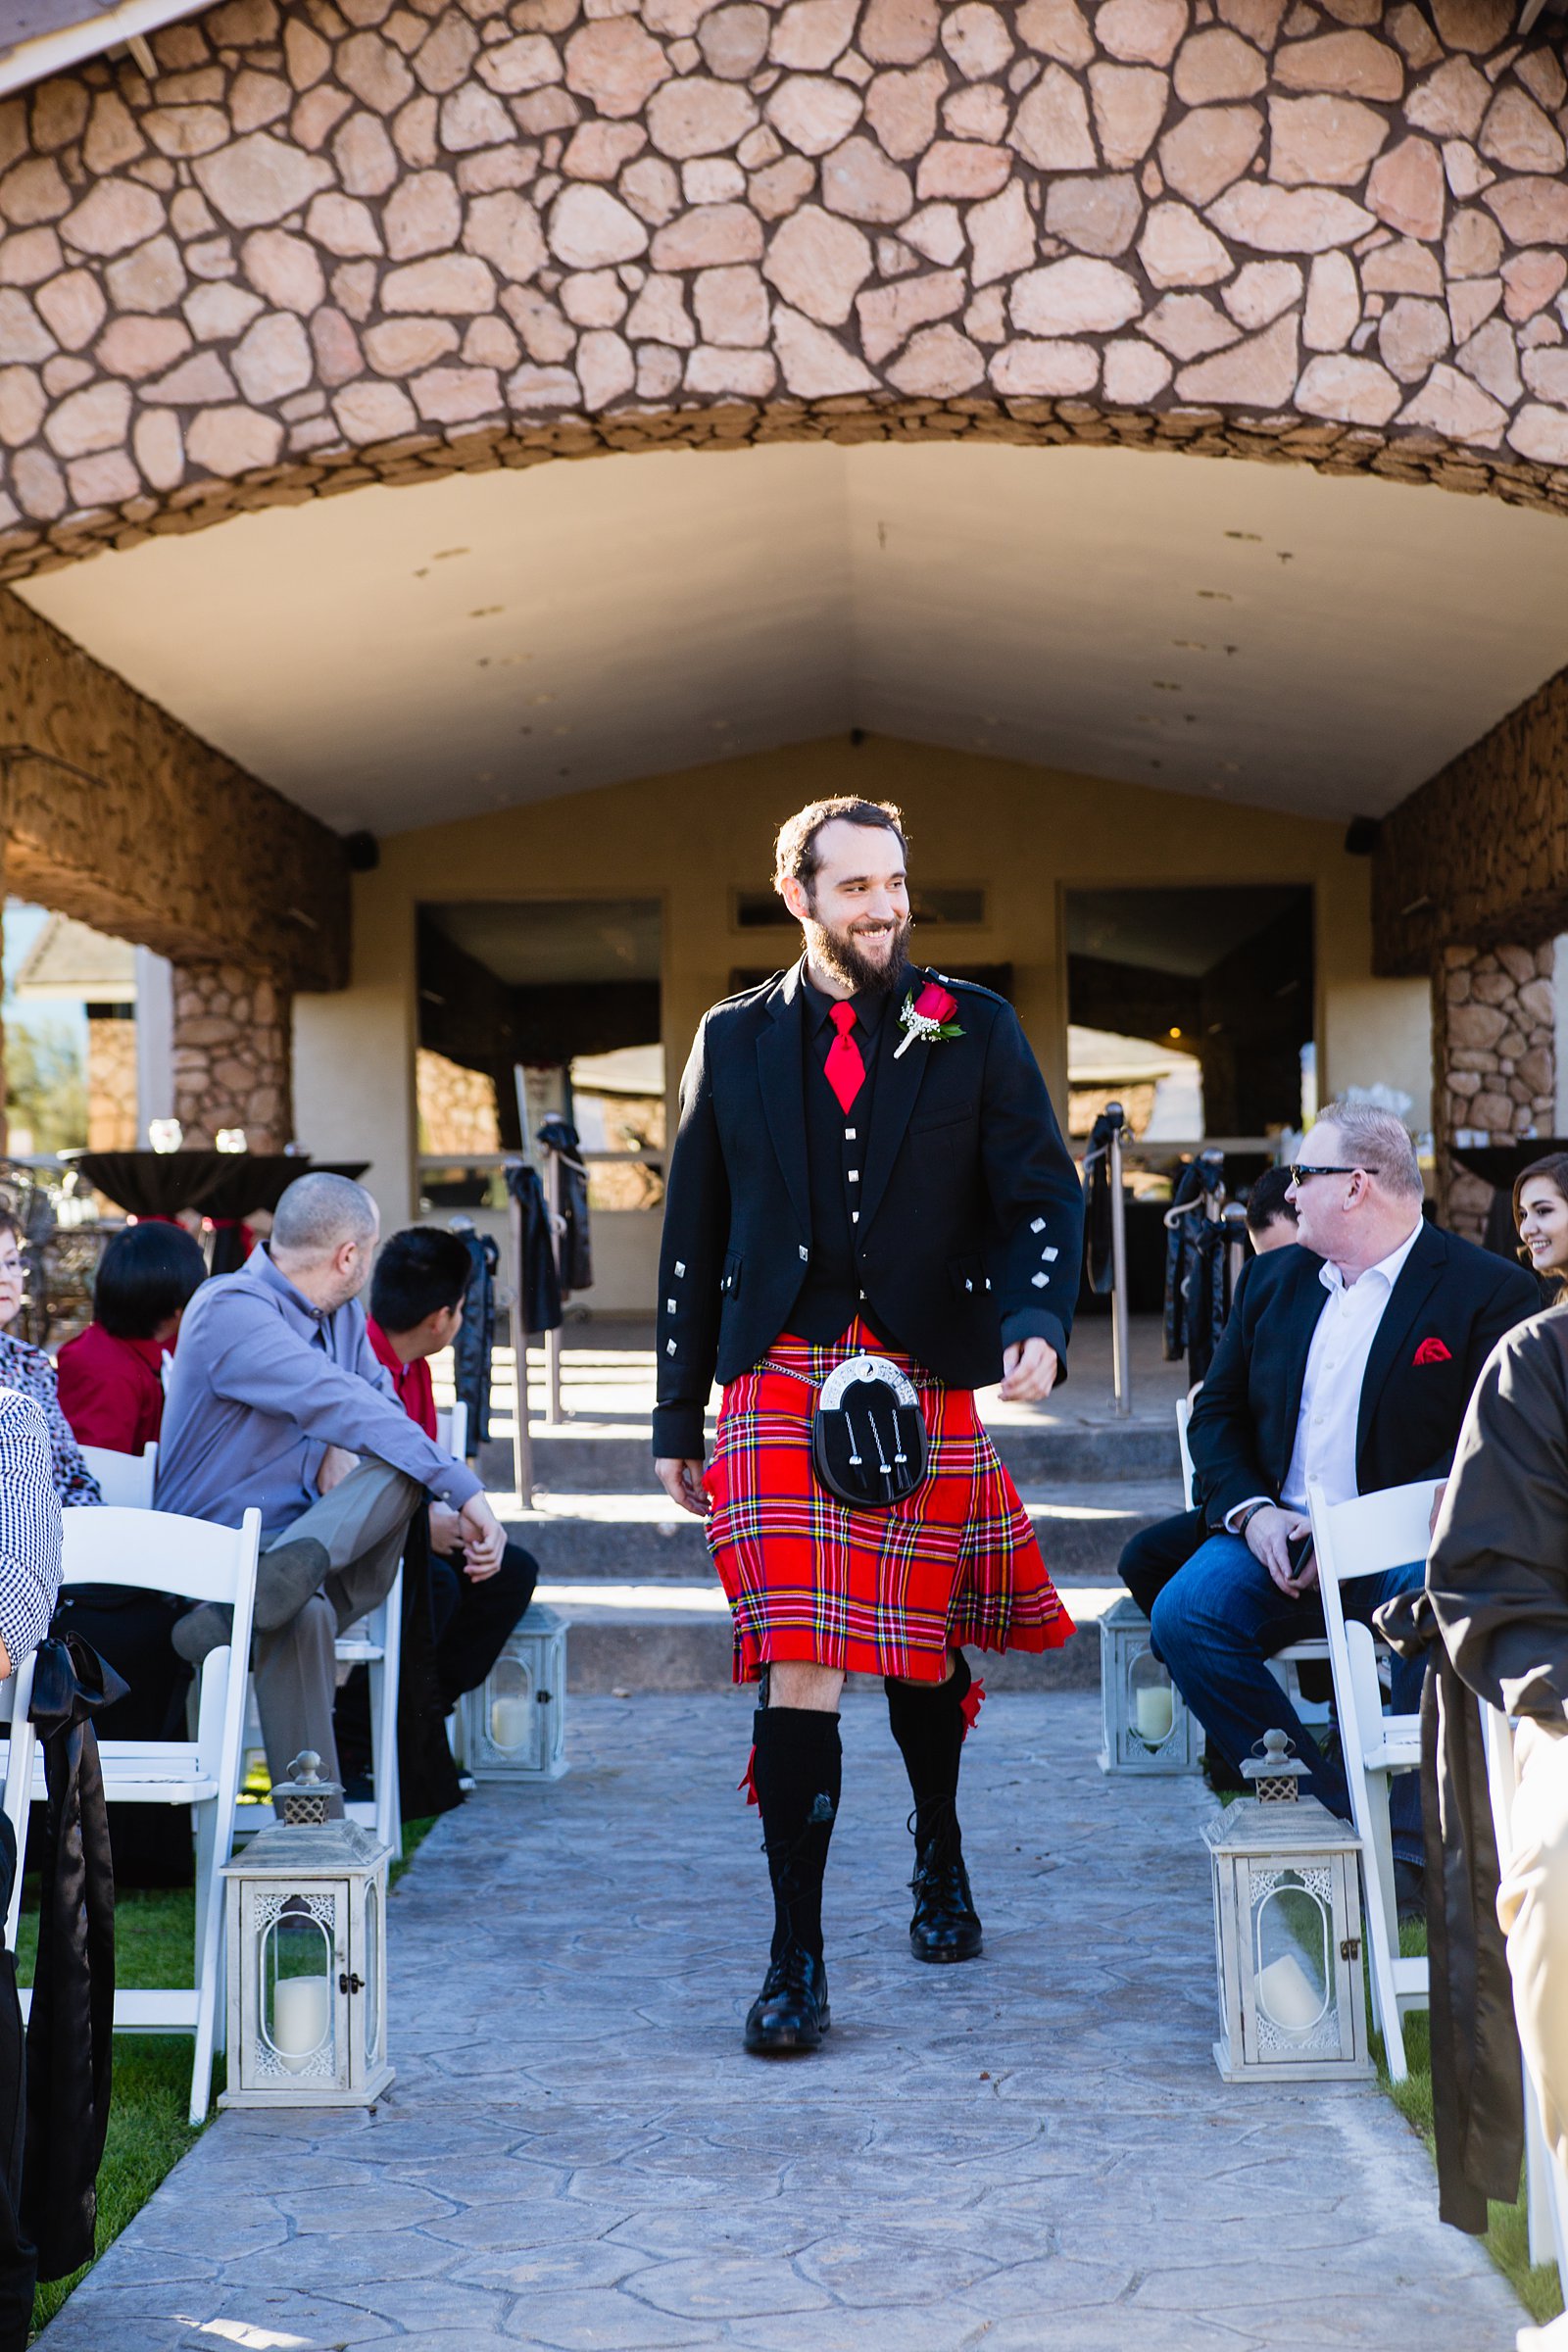 Scottish groom in red and black kilt walking down the aisle for his wedding ceremony by wedding photographers PMA Photography.